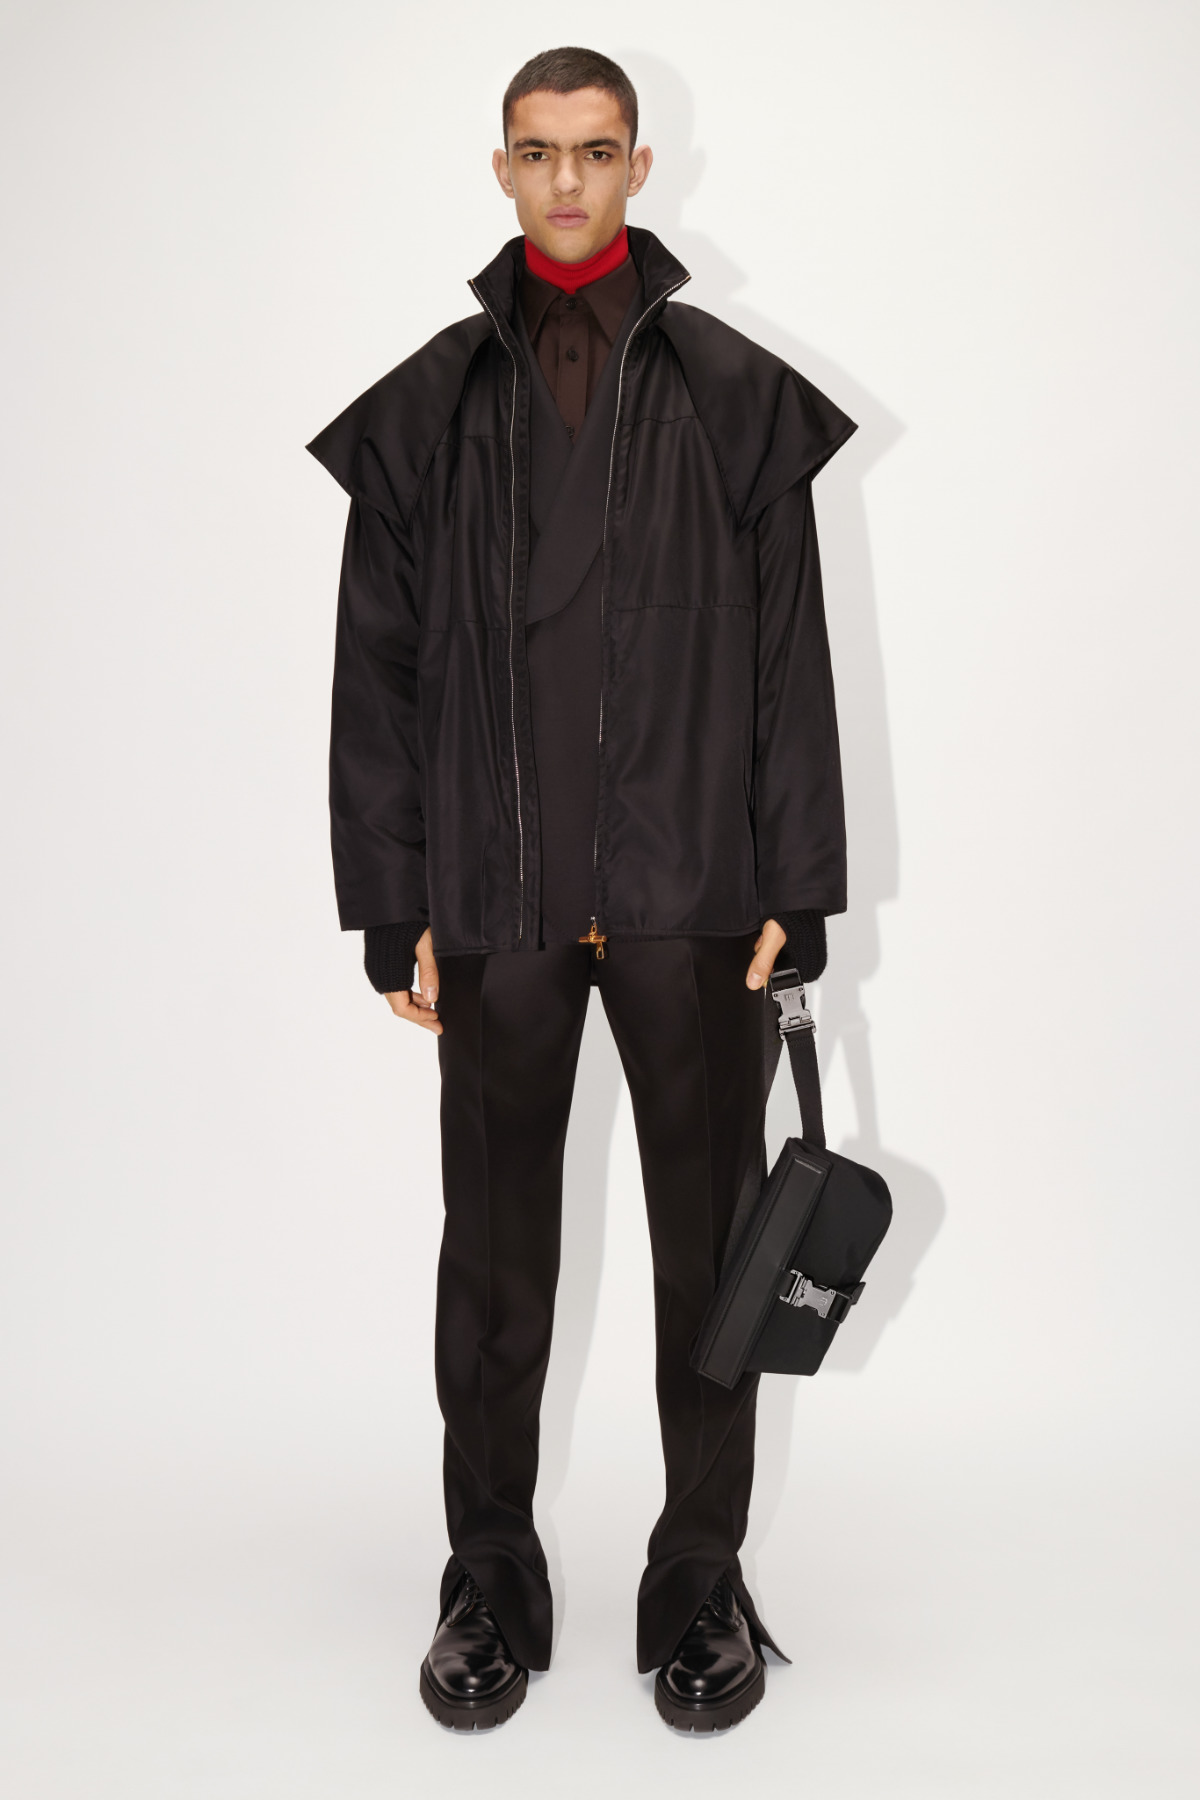 dunhill Presents Its New Fall Winter 2022 Collection: Uniform